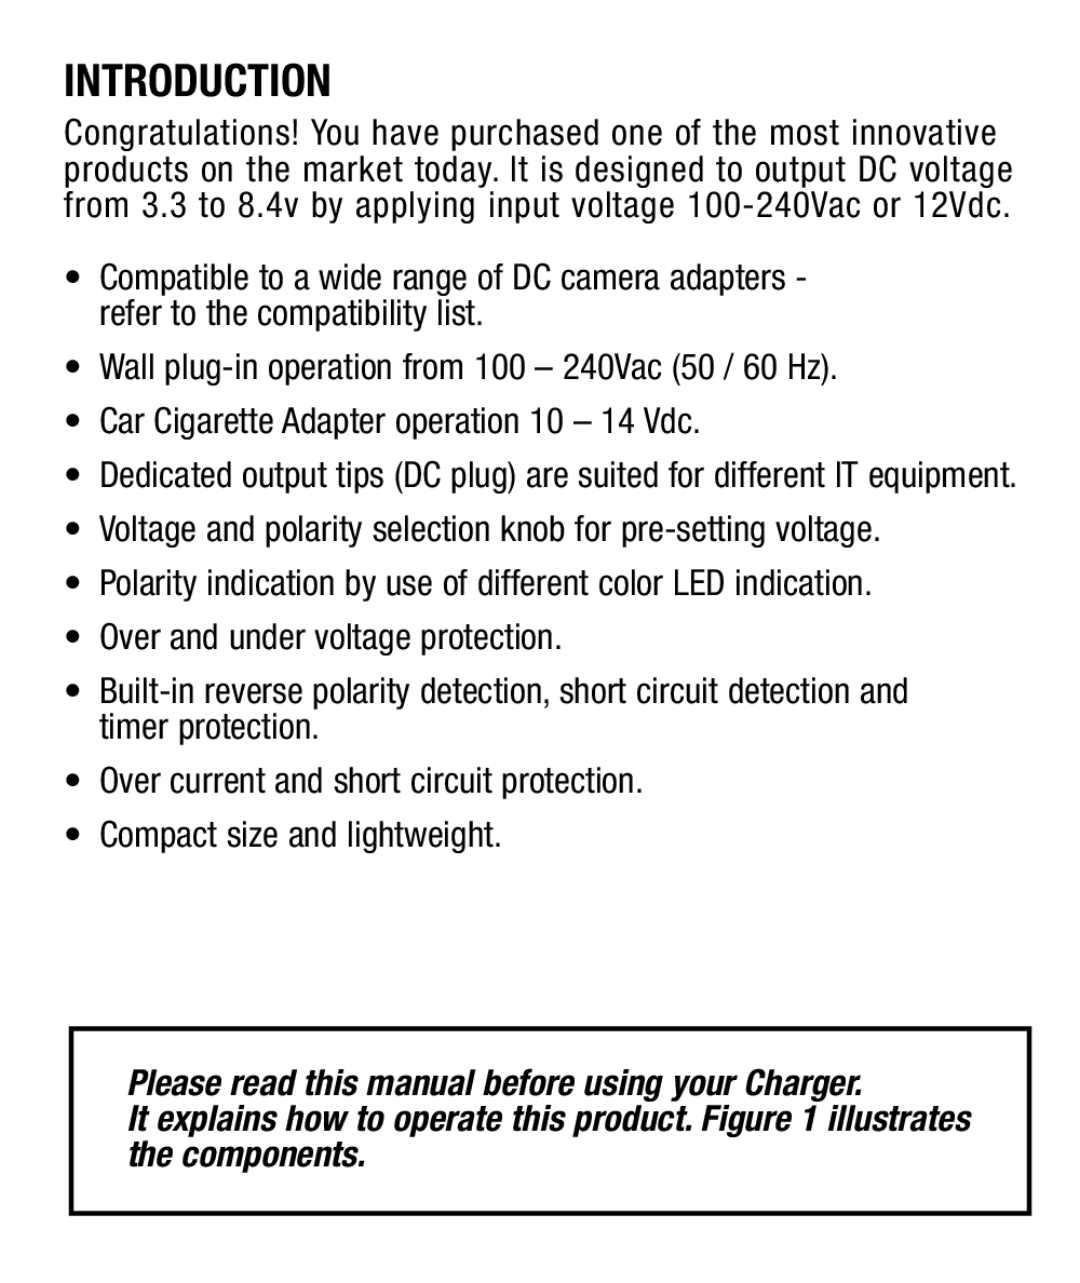 Maxell AC 3000 Introduction, Please read this manual before using your Charger 